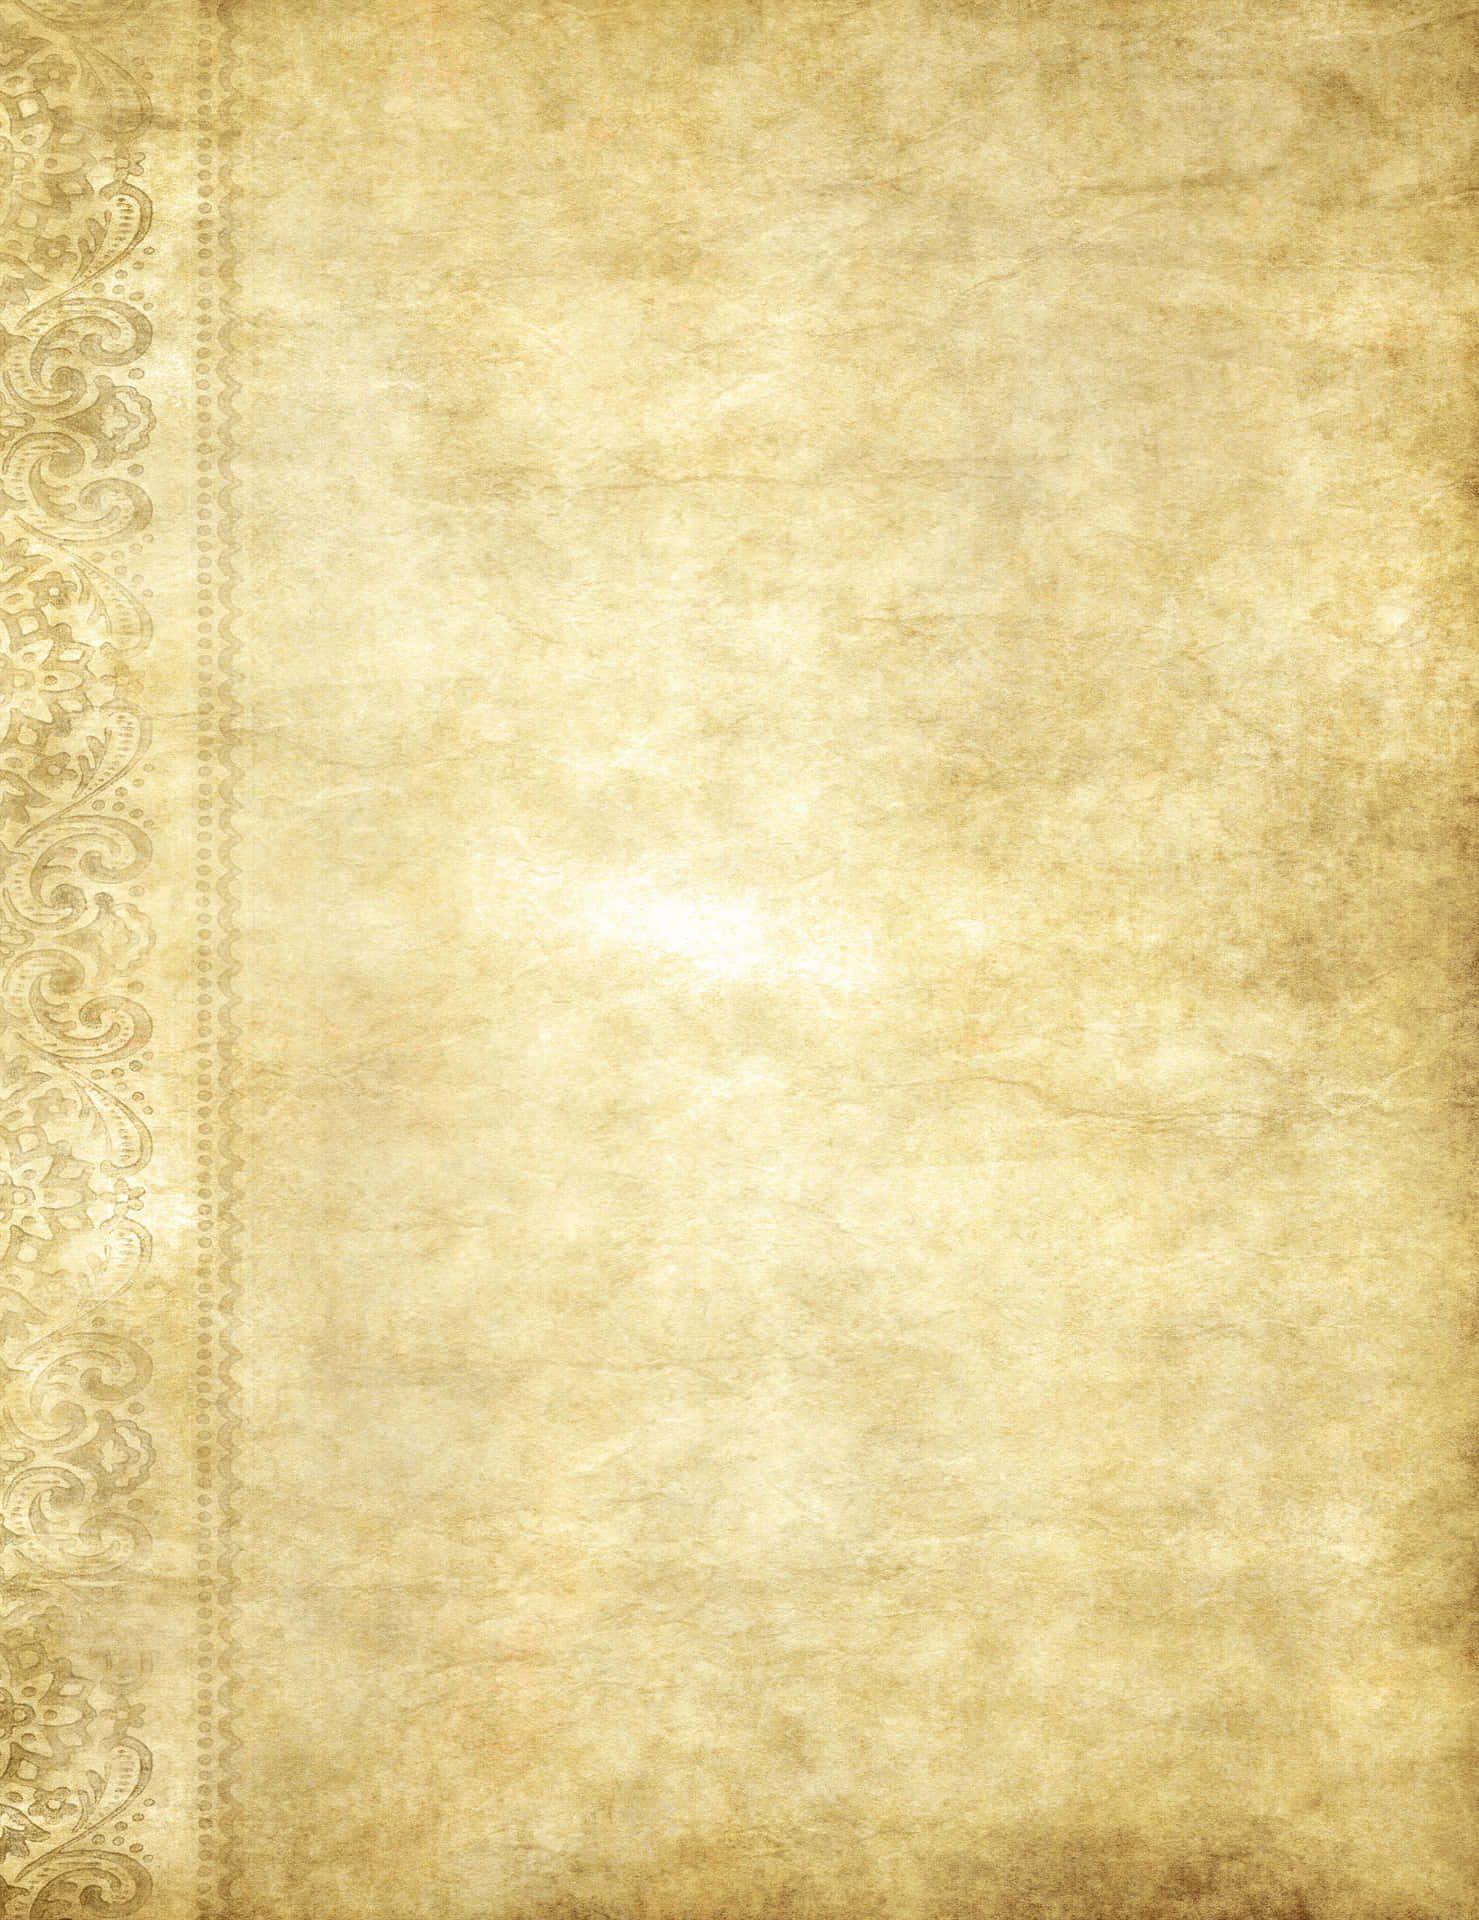 "Neutral Off-White Paper Texture Background"